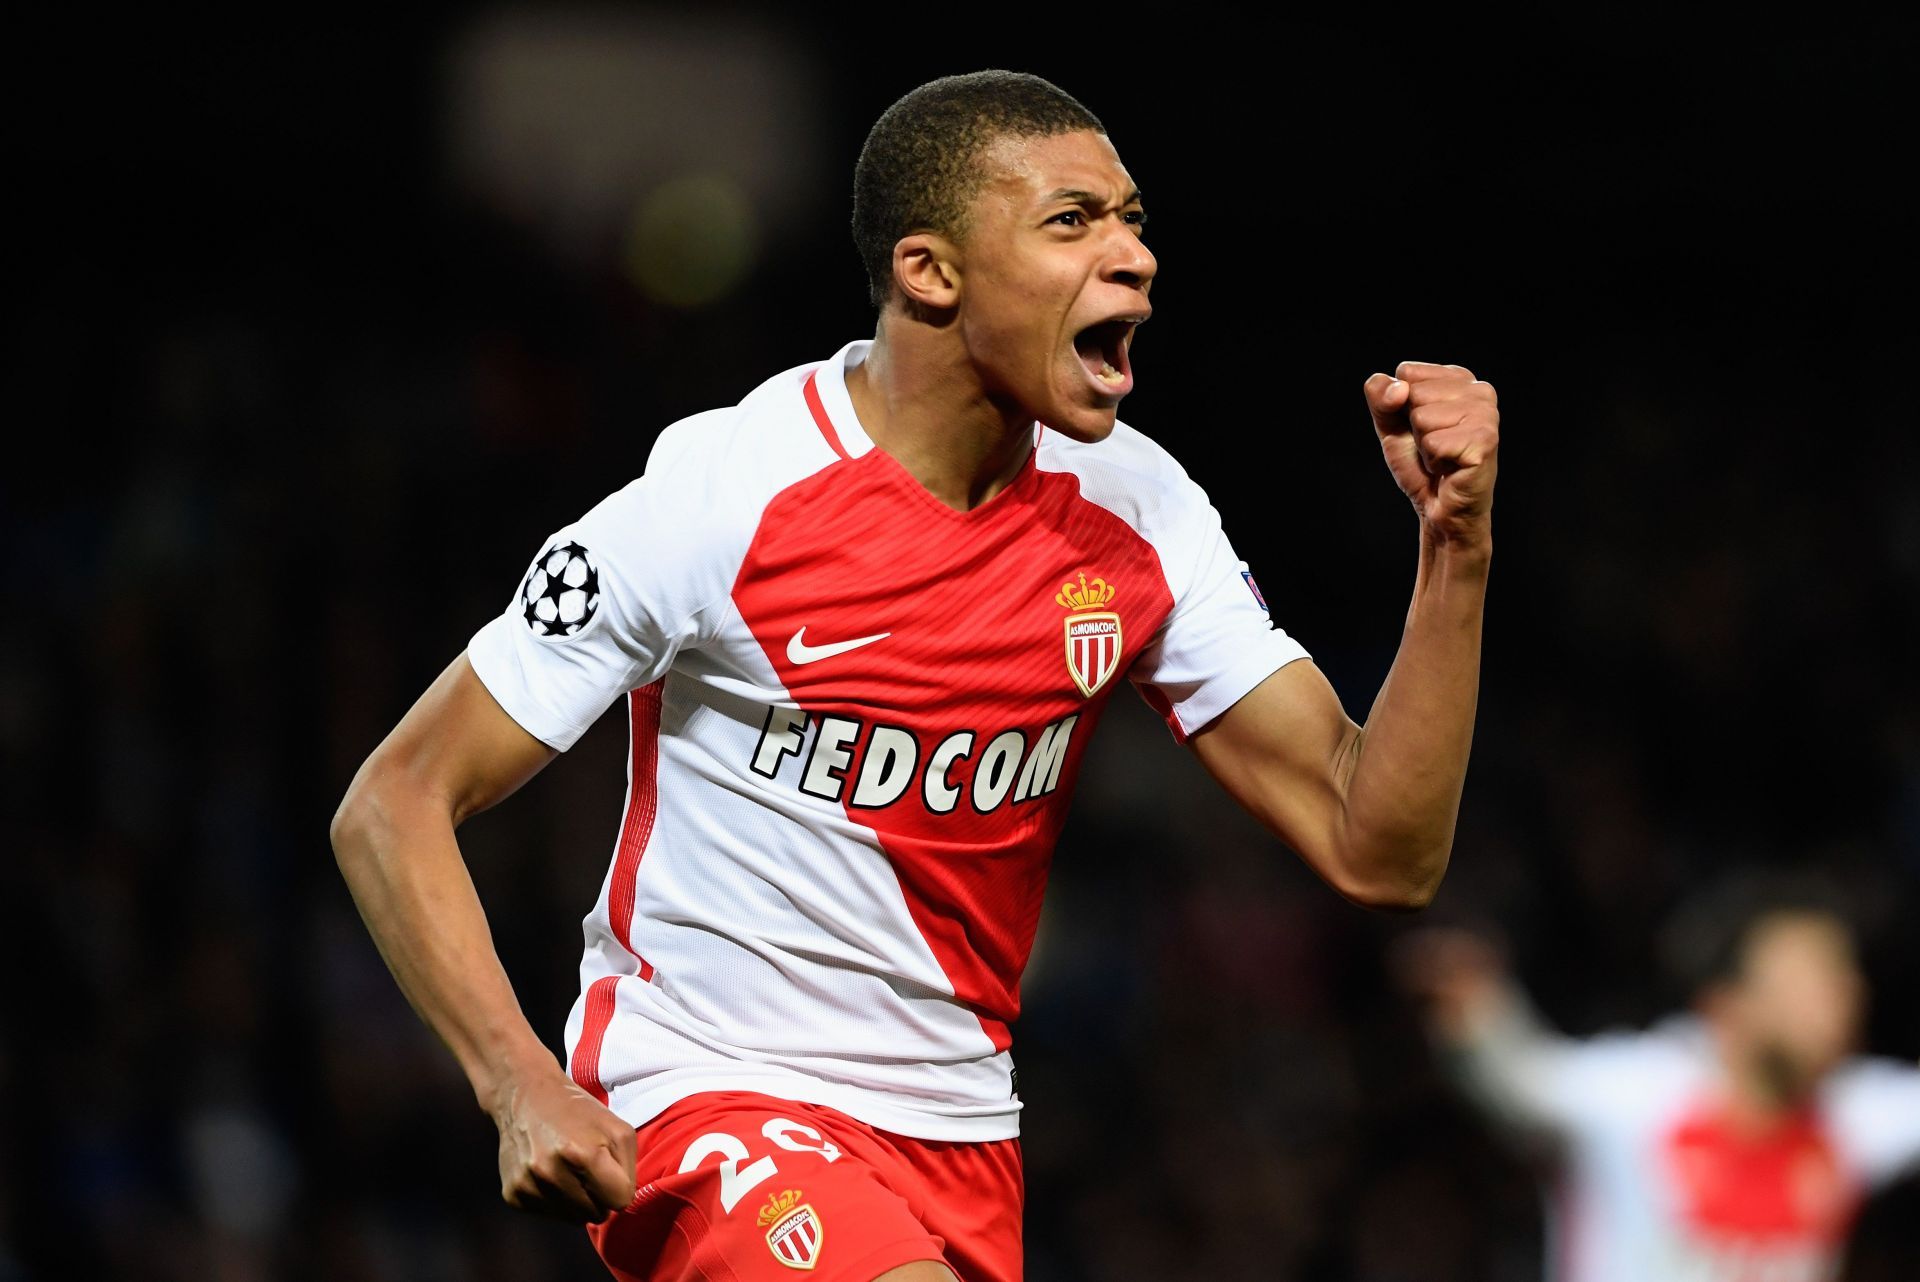 A teenage Kylian Mbappe set France and Europe on fire in 2016-17